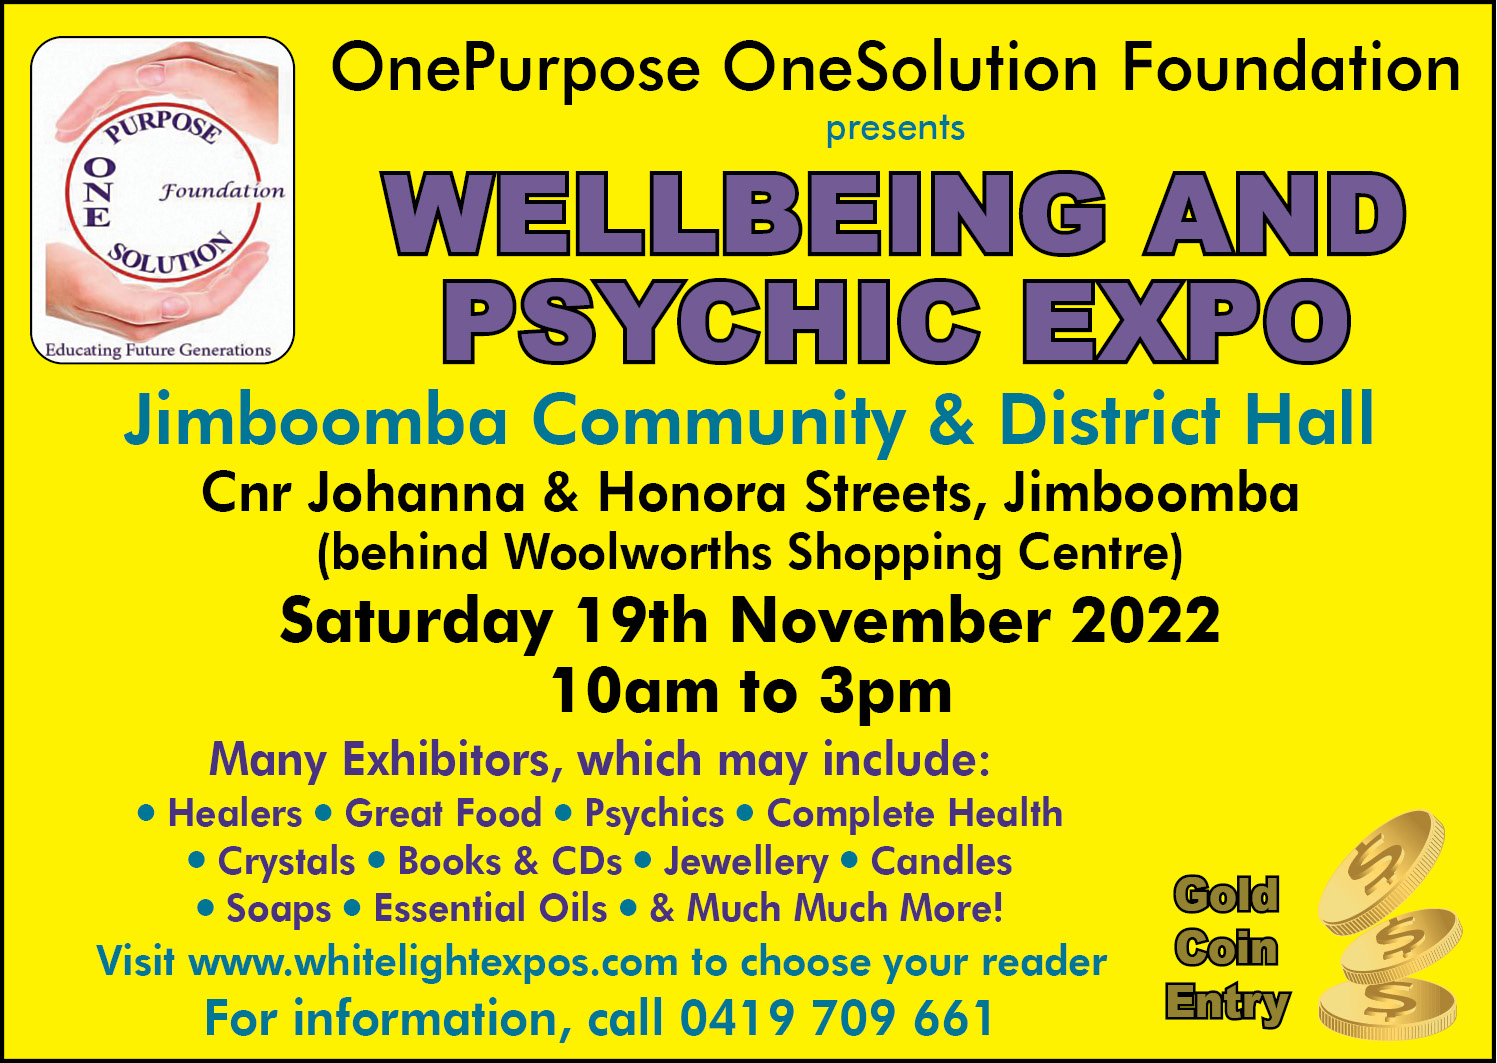 Well Being And Psychic Expo